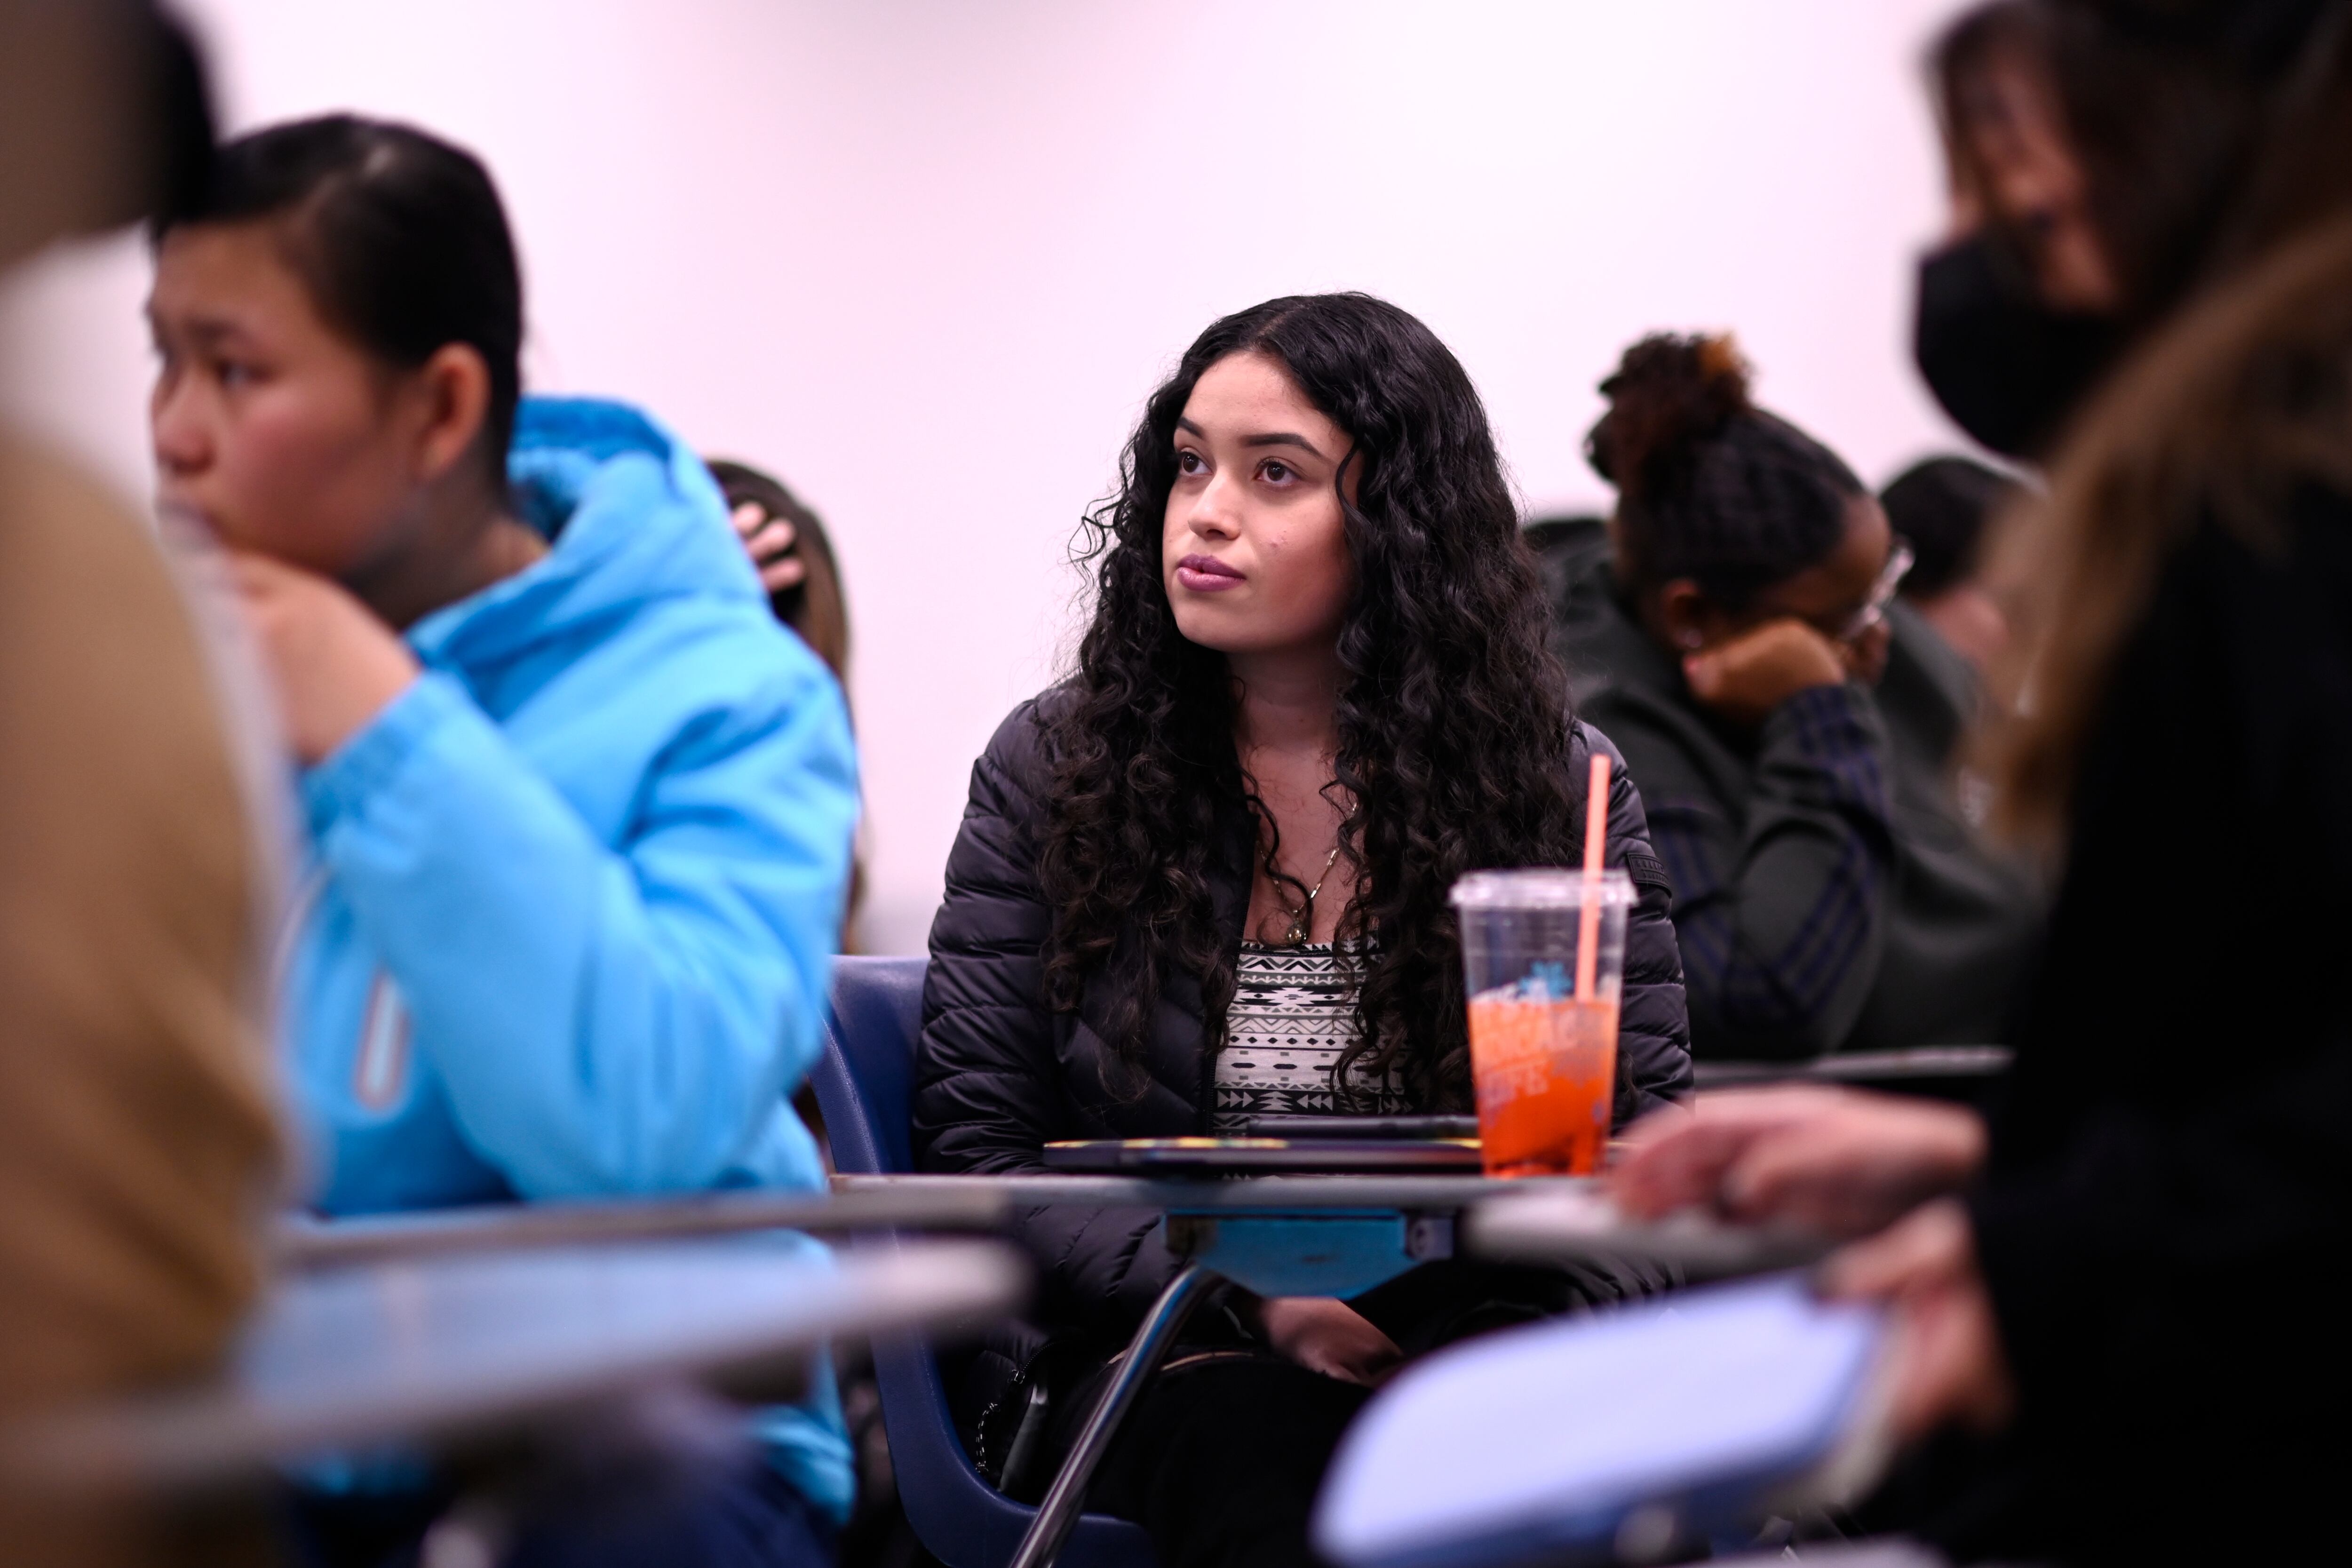 A young woman with long dark hair sits in a crowded college classroom. She looks toward the front of the room. She has a large orange-pink drink on her desk. She’s surrounded by other students.